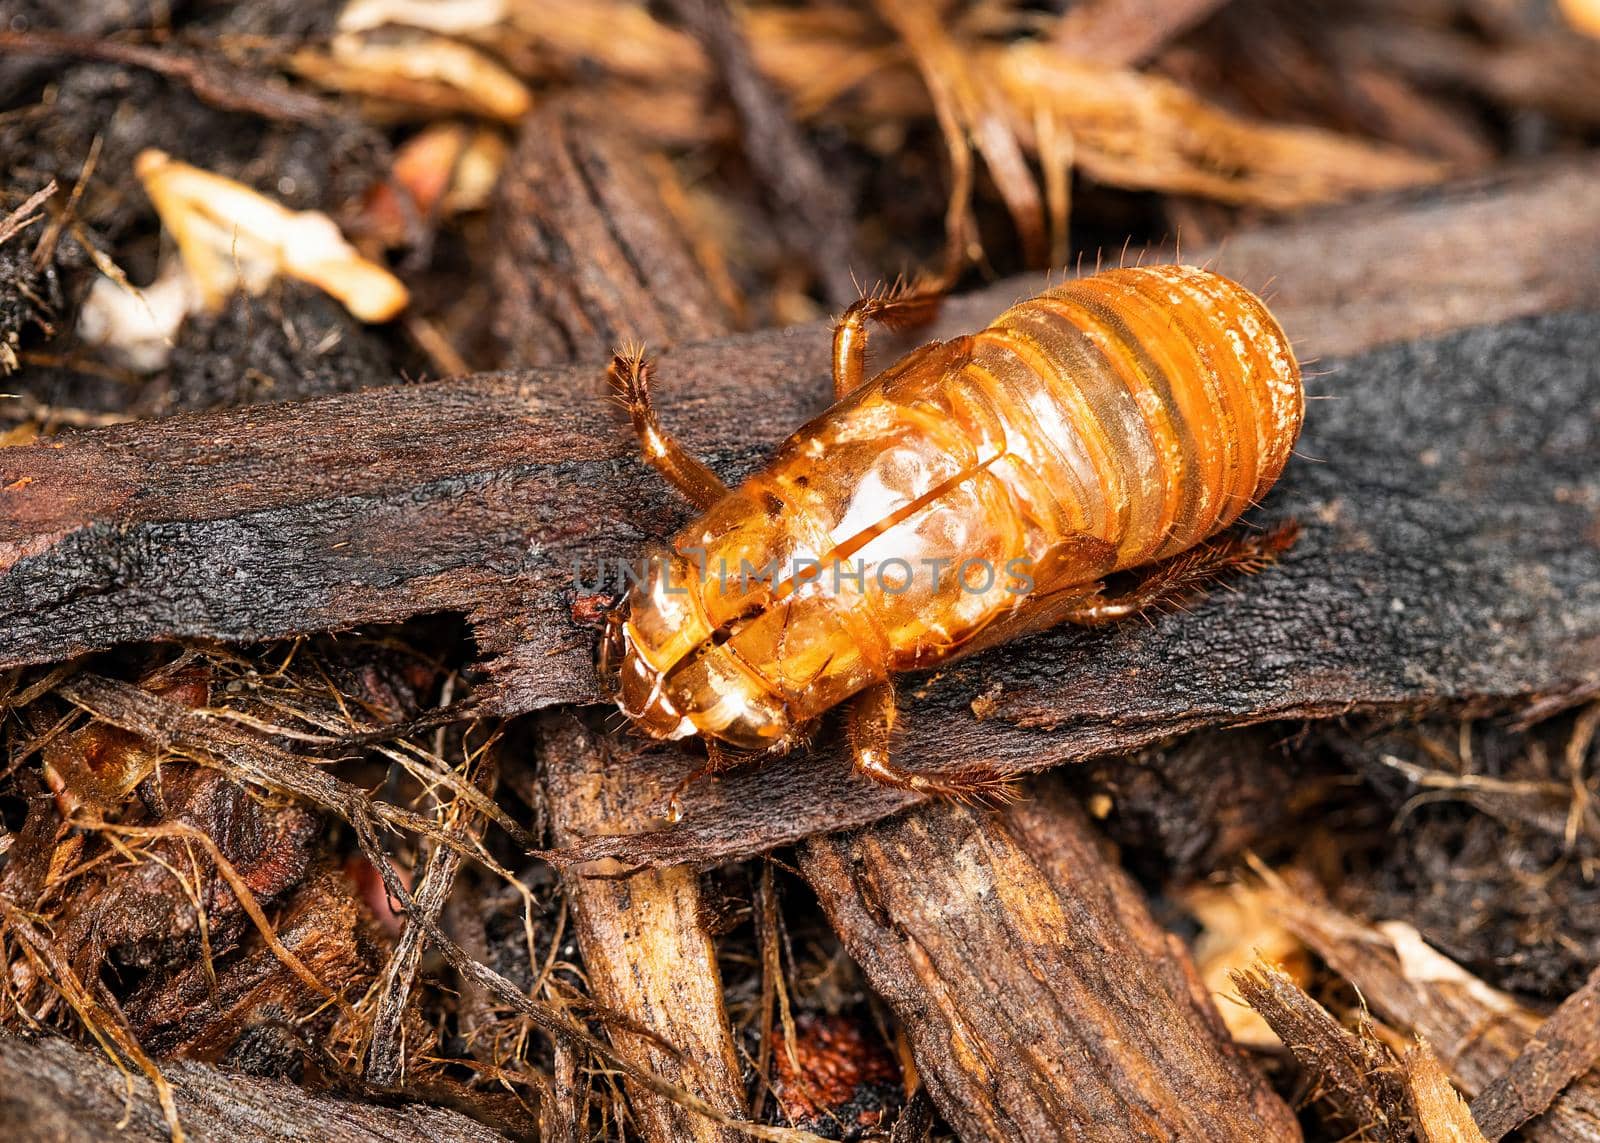 A Brood X cicada has left its exoskeleton after emerging from underground.